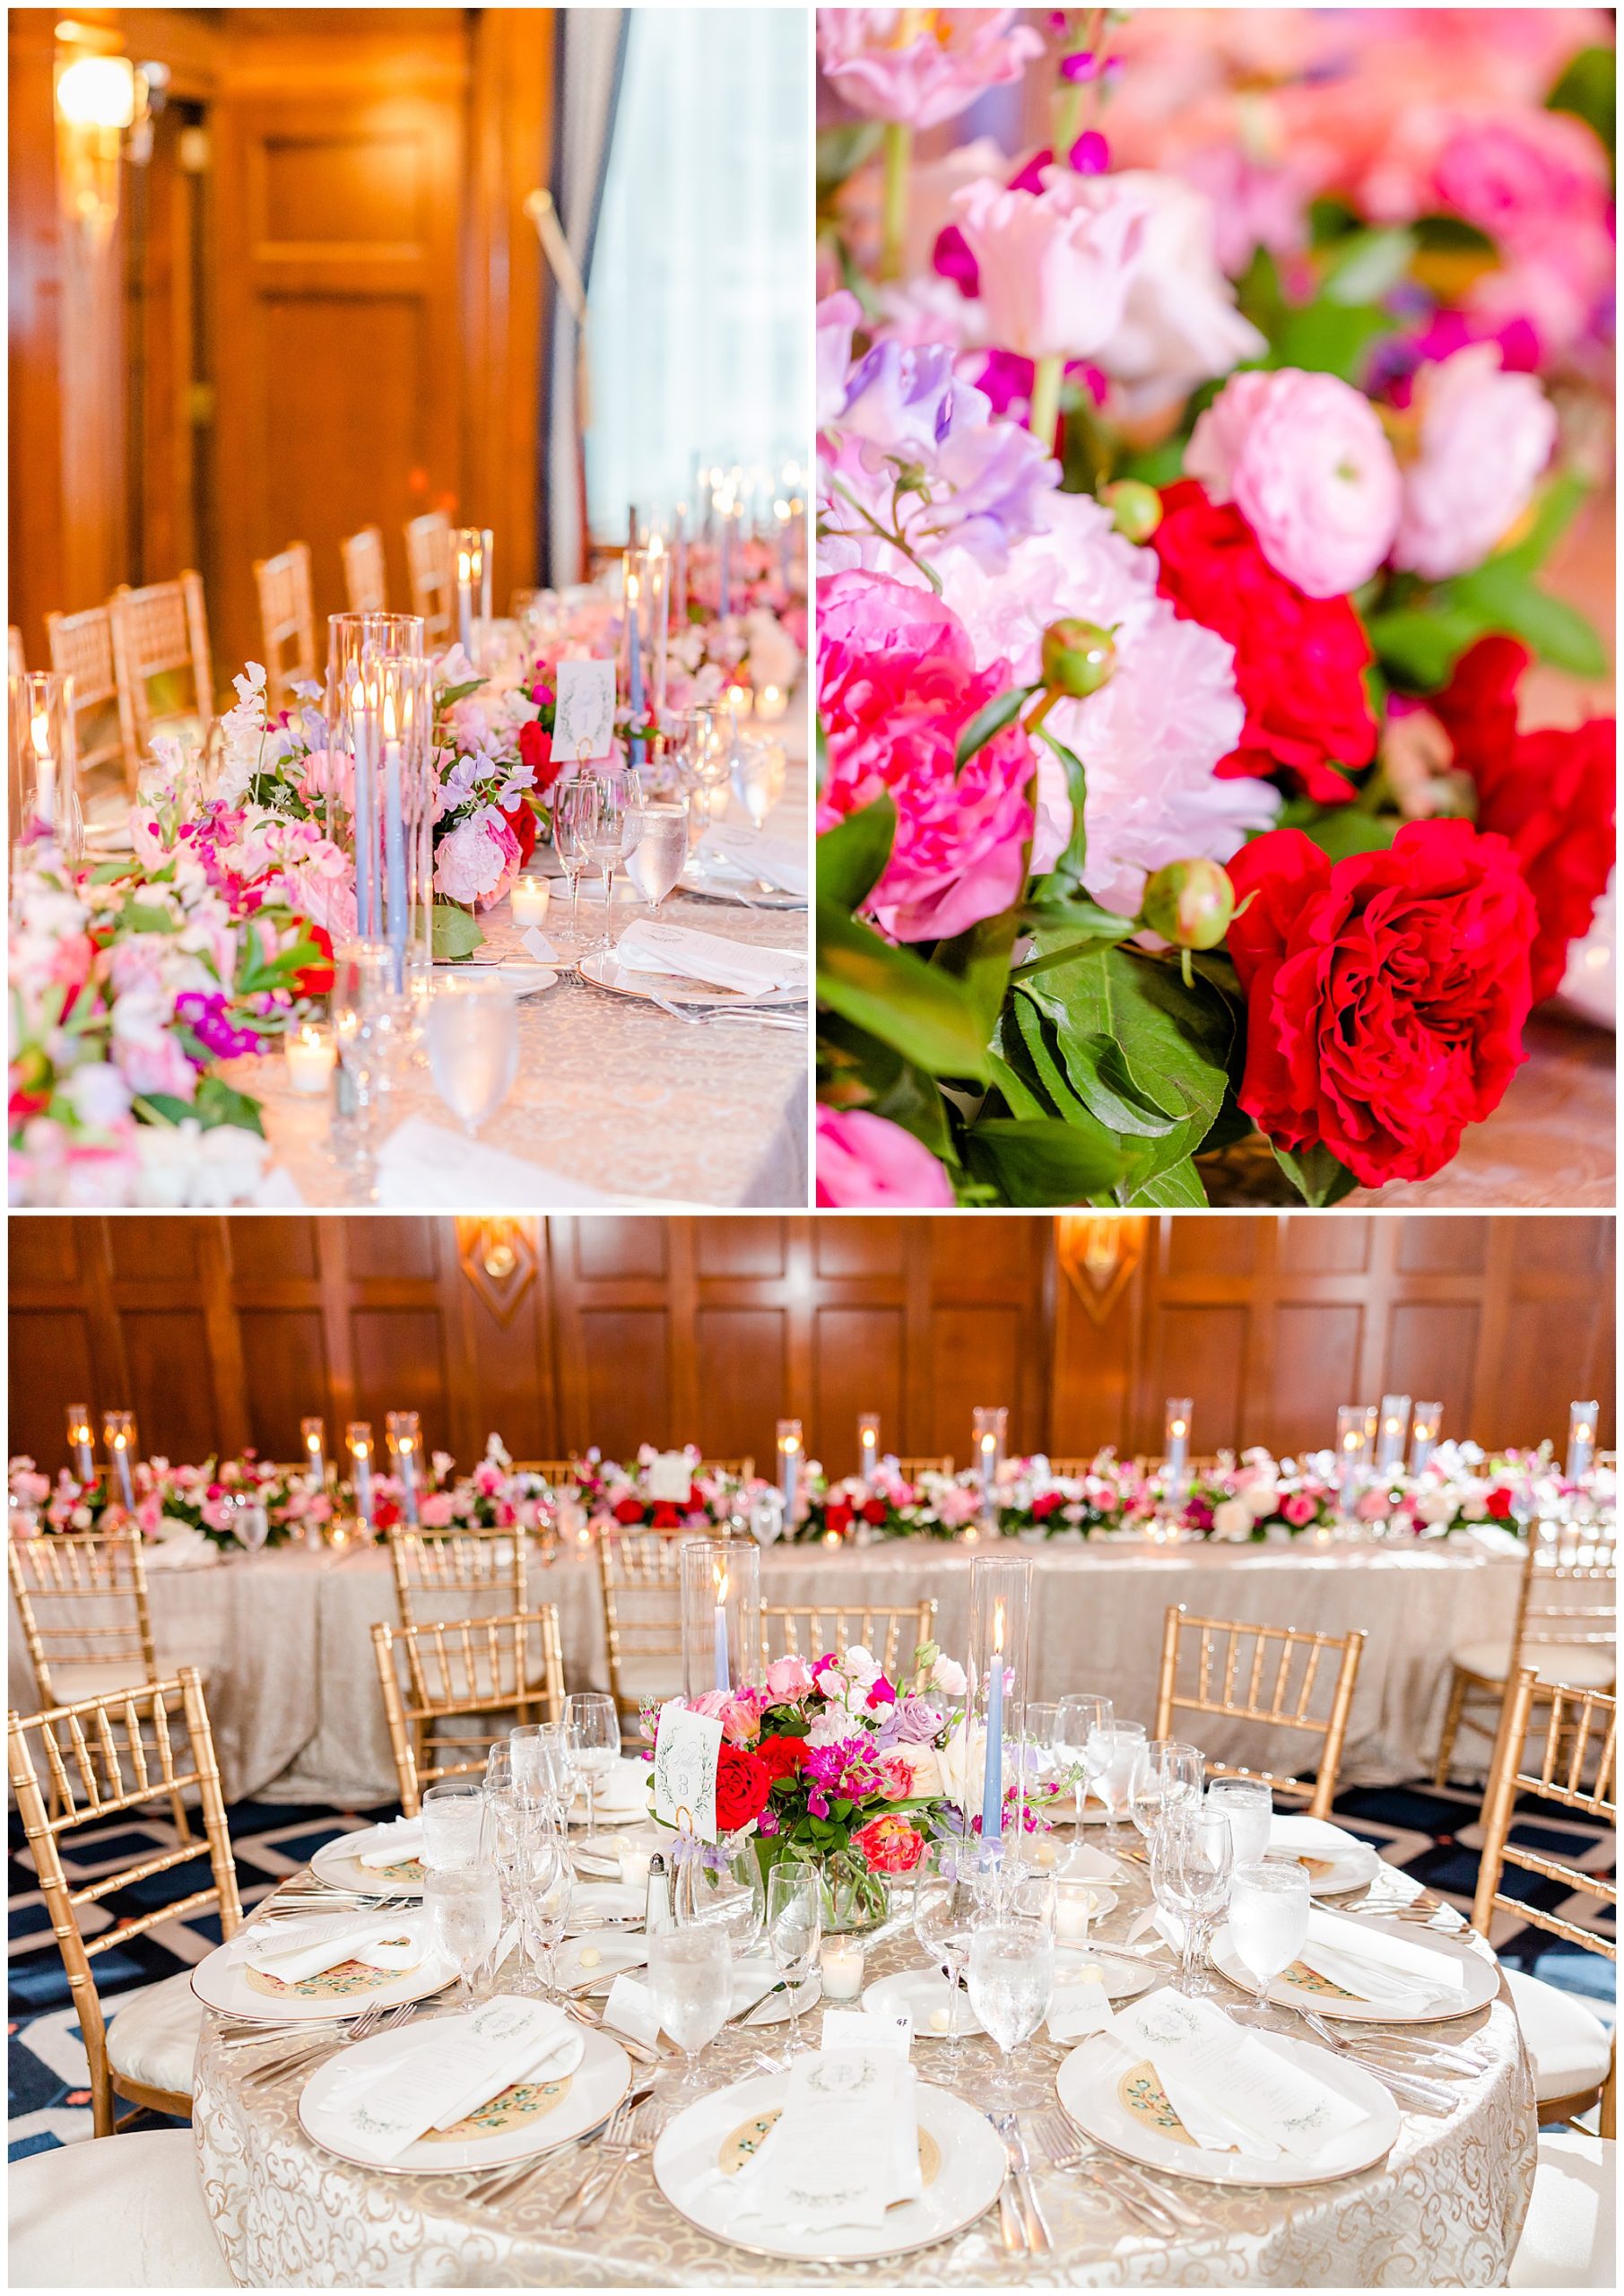 elegant French blue Willard Intercontinental wedding, DC wedding, elegent DC wedding, luxury DC wedding venue, high end DC wedding venue, DC wedding photographer, spring wedding aesthetic, spring wedding ideas, classic DC wedding, classic wedding ideas, Rachel E.H. Photography, French blue aesthetic, floral focused wedding reception, Victoria Clausen Floral Events, peony and rose reception florals, colorful wedding reception, floral focused tablescape, pink and red roses